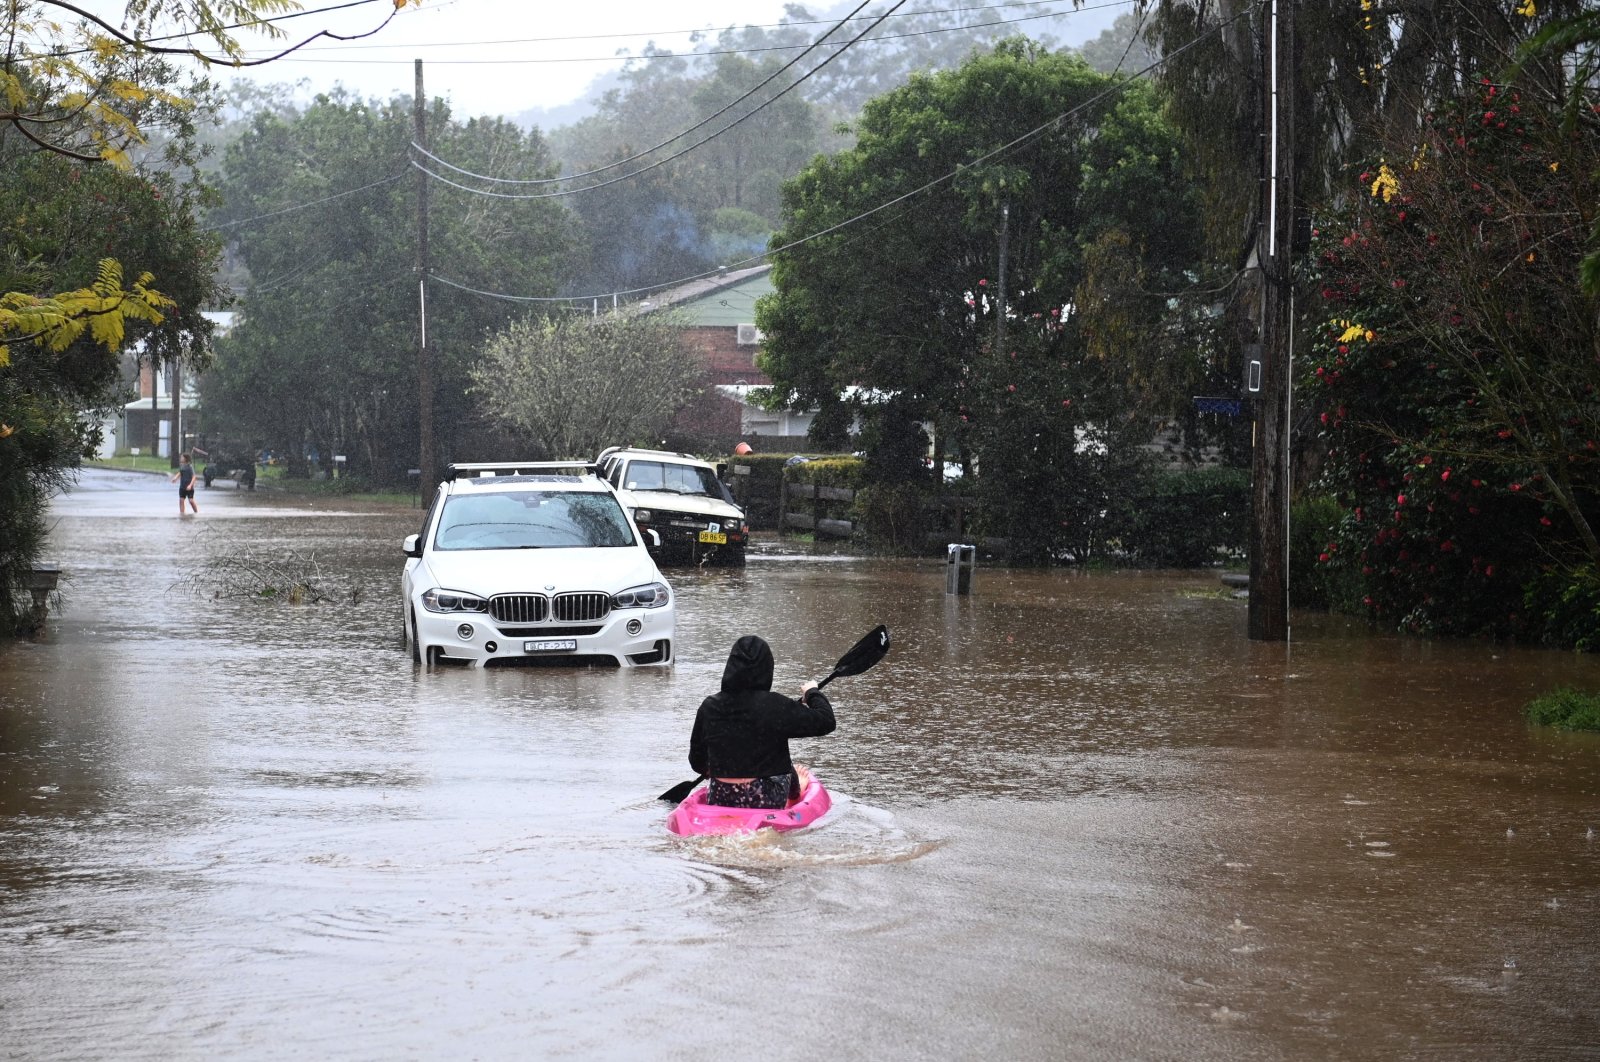 Children are seen on kayaks in floodwaters which have inundated the town of Yarramalong on the Central Coast, north of Sydney, Australia, July 5, 2022. (EPA Photo)